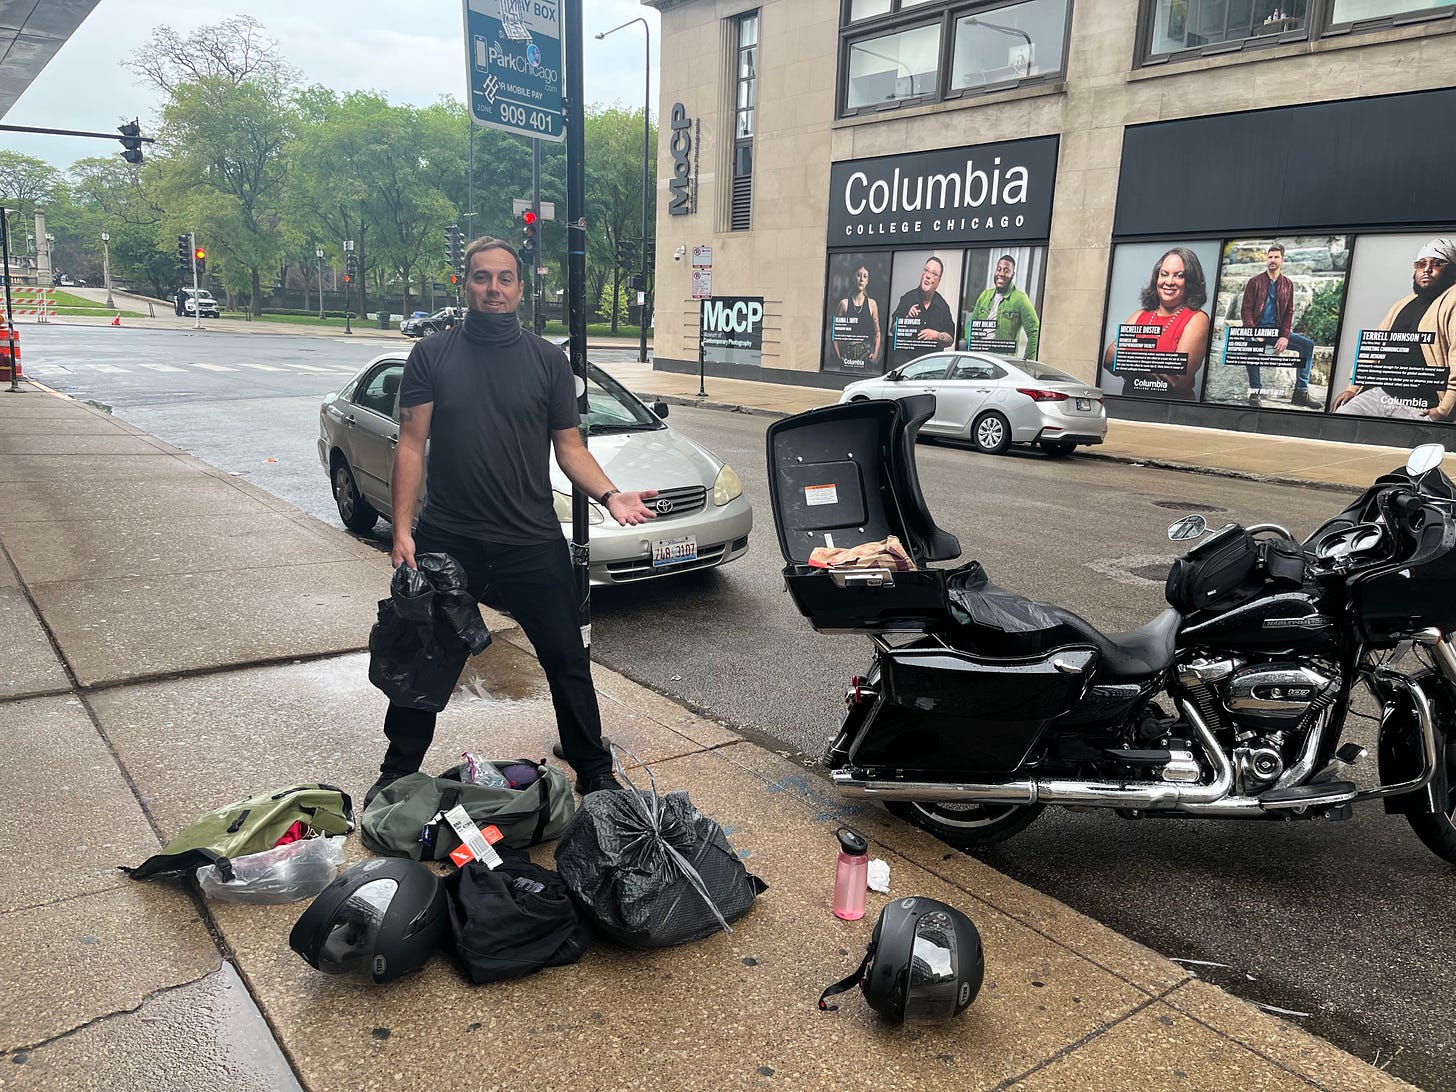 Derrick stands on a sidewalk with all their gear from the motorcycle in front of him. The pavement is wet from rain. The bike is parked on the road next to Derrick. Derrick smiles at the camera.